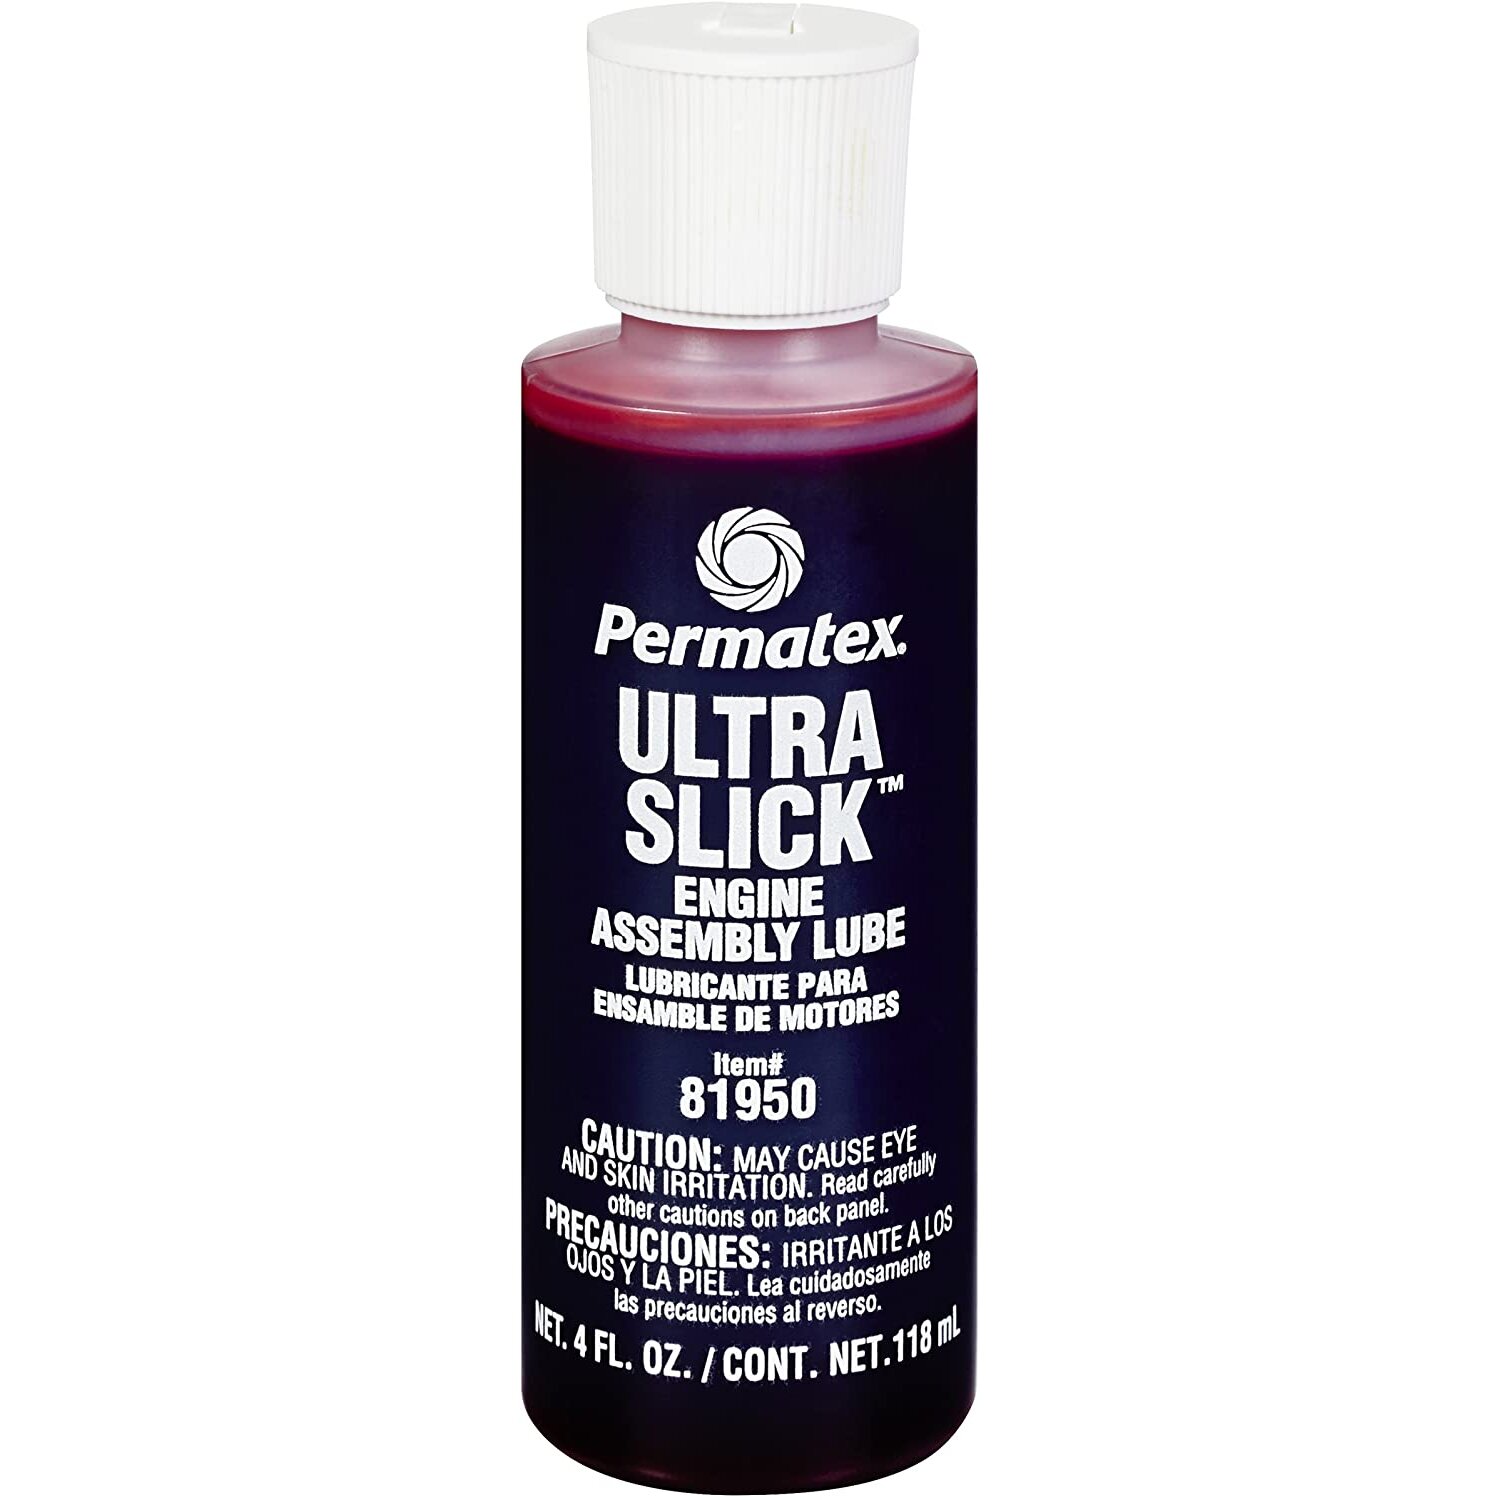 Permatex 81950 Ultra Slick Engine Assembly Lube, Red, Single Unit